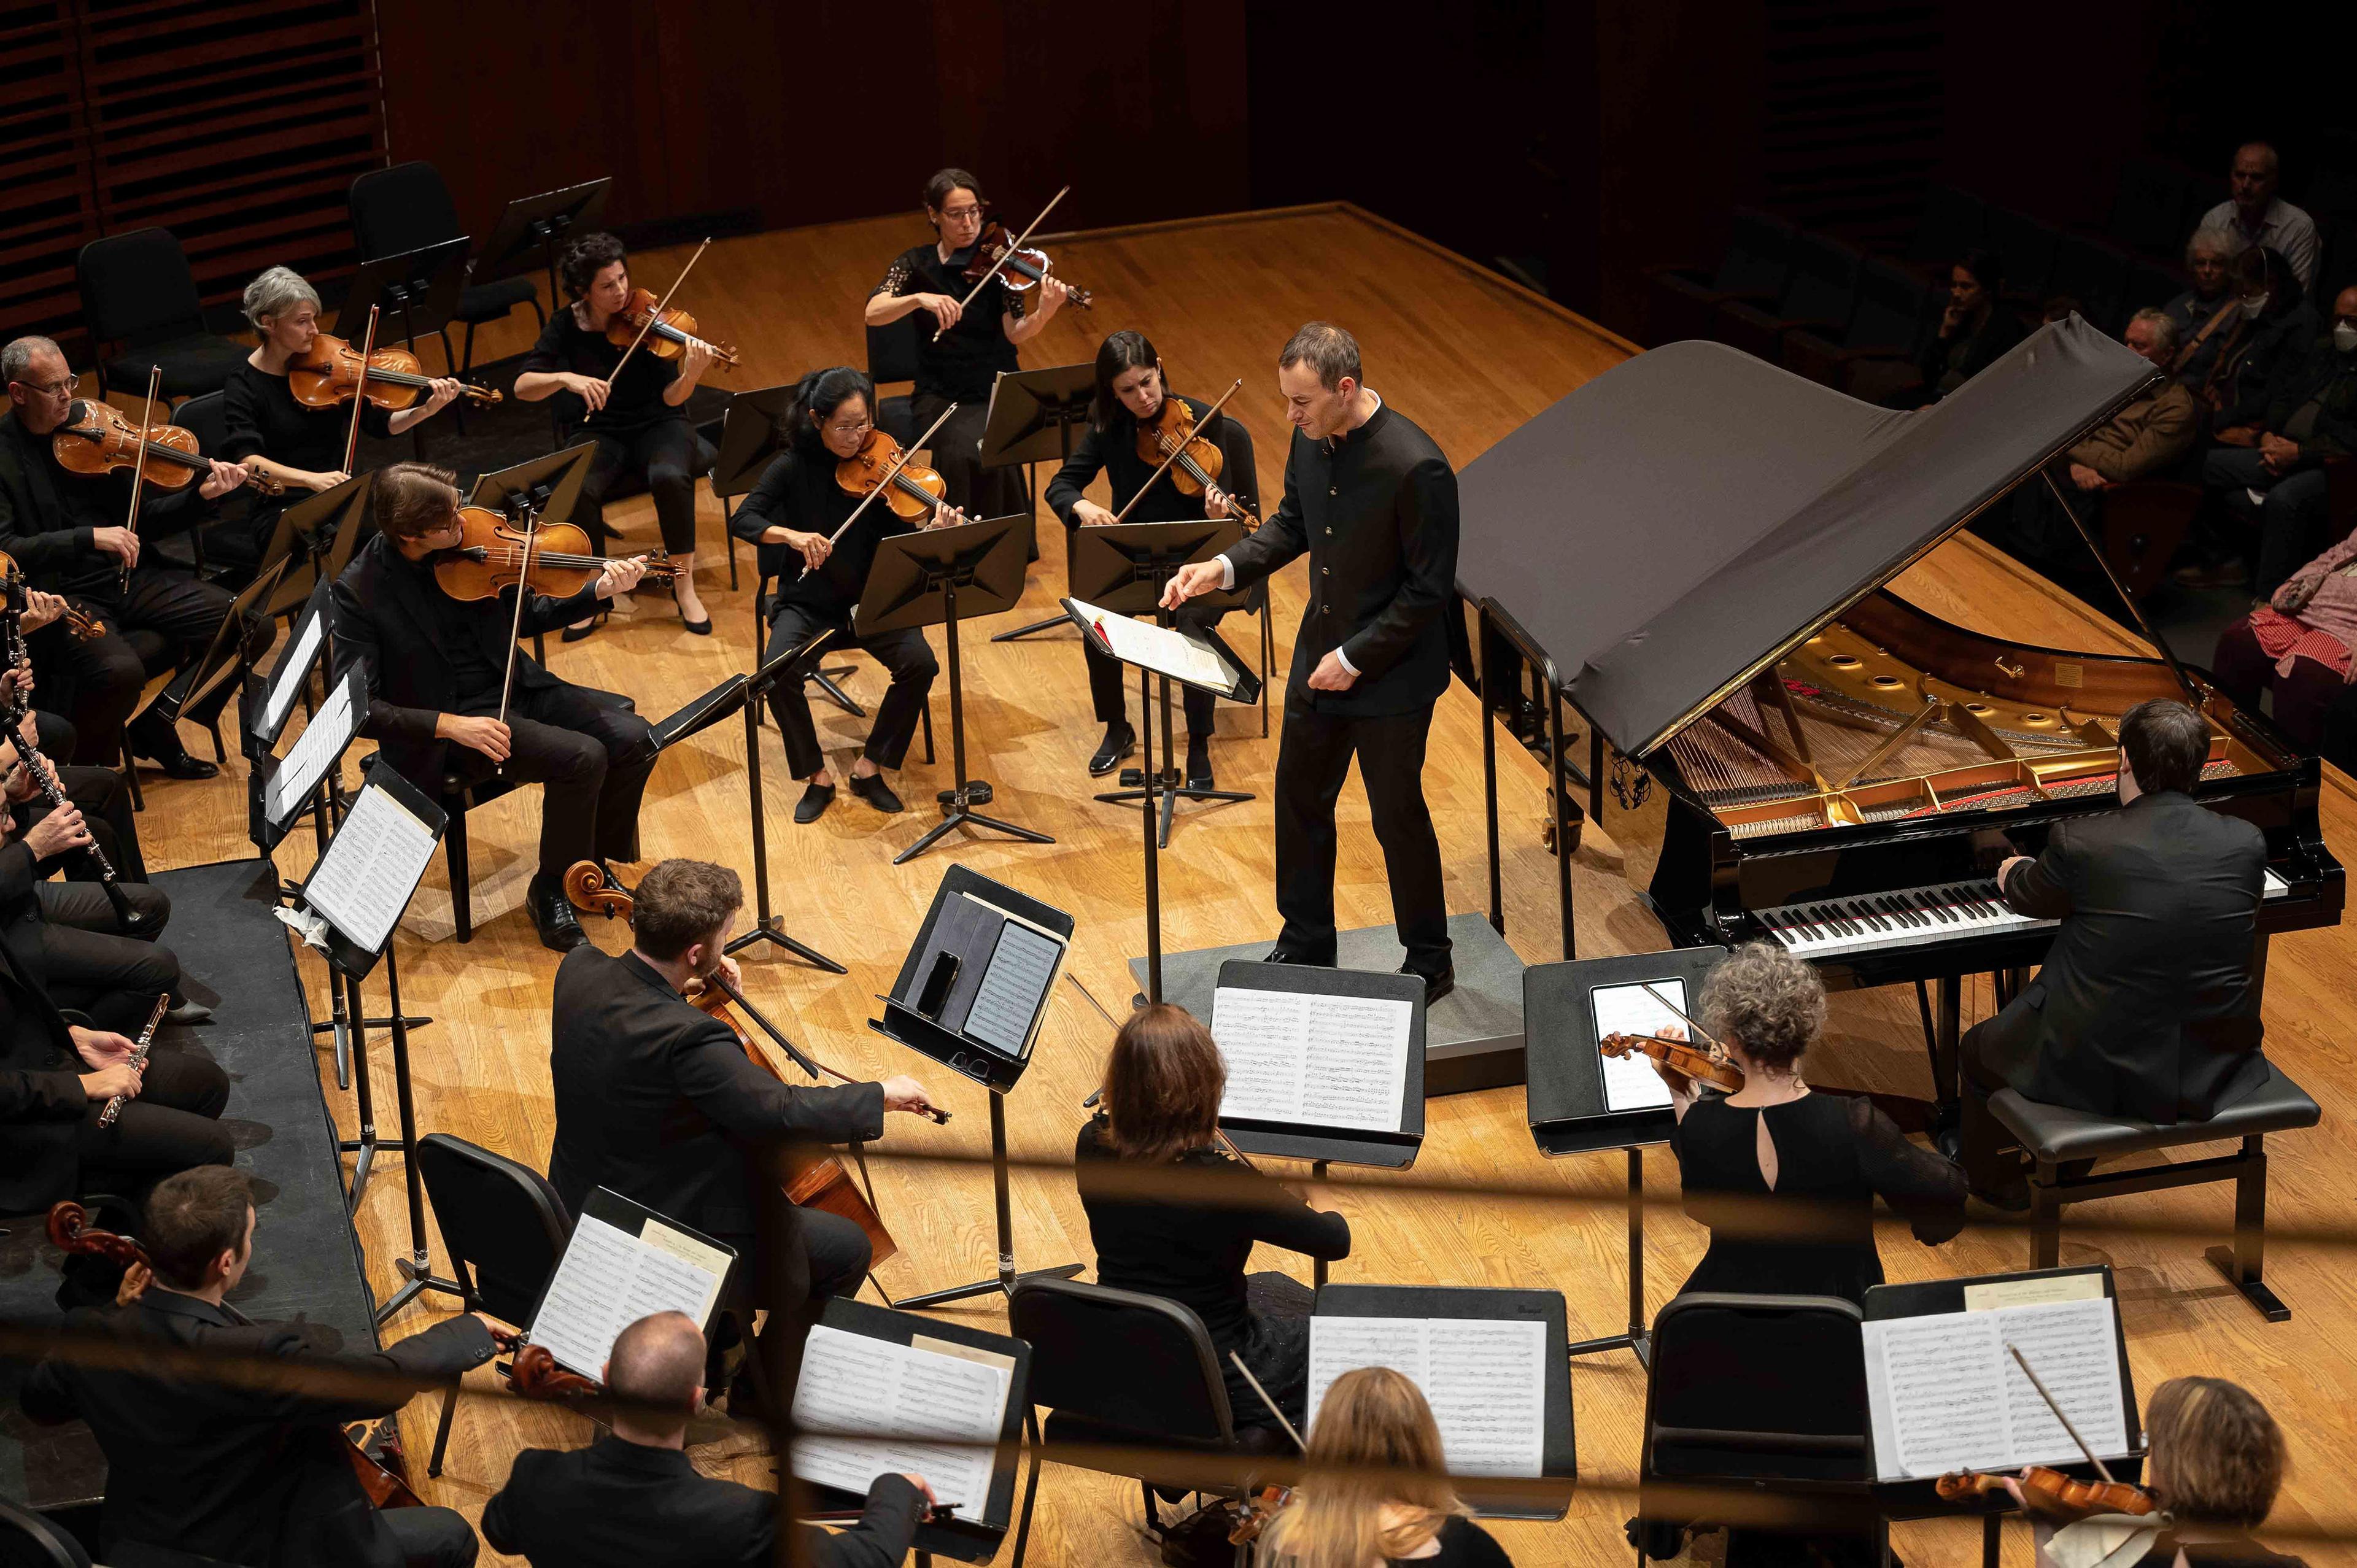 Musicians of the orchestra playing on stage with conductor and pianist